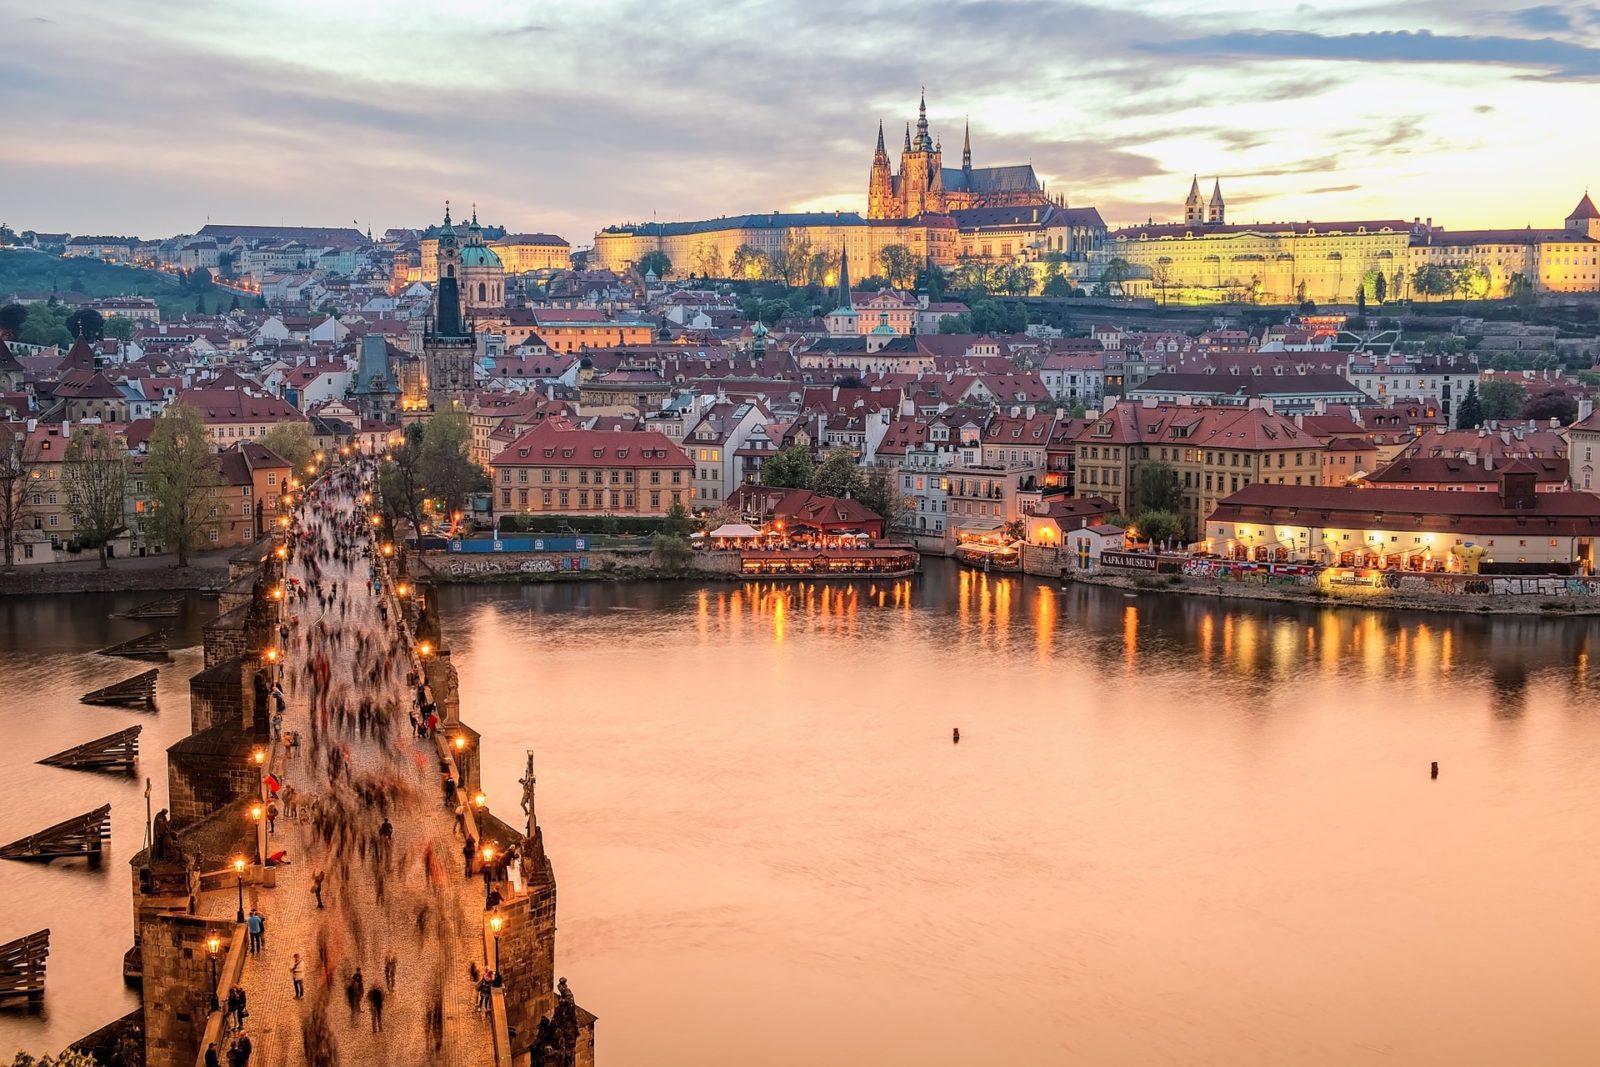 hire talent anywhere with goglobal in the czech republic